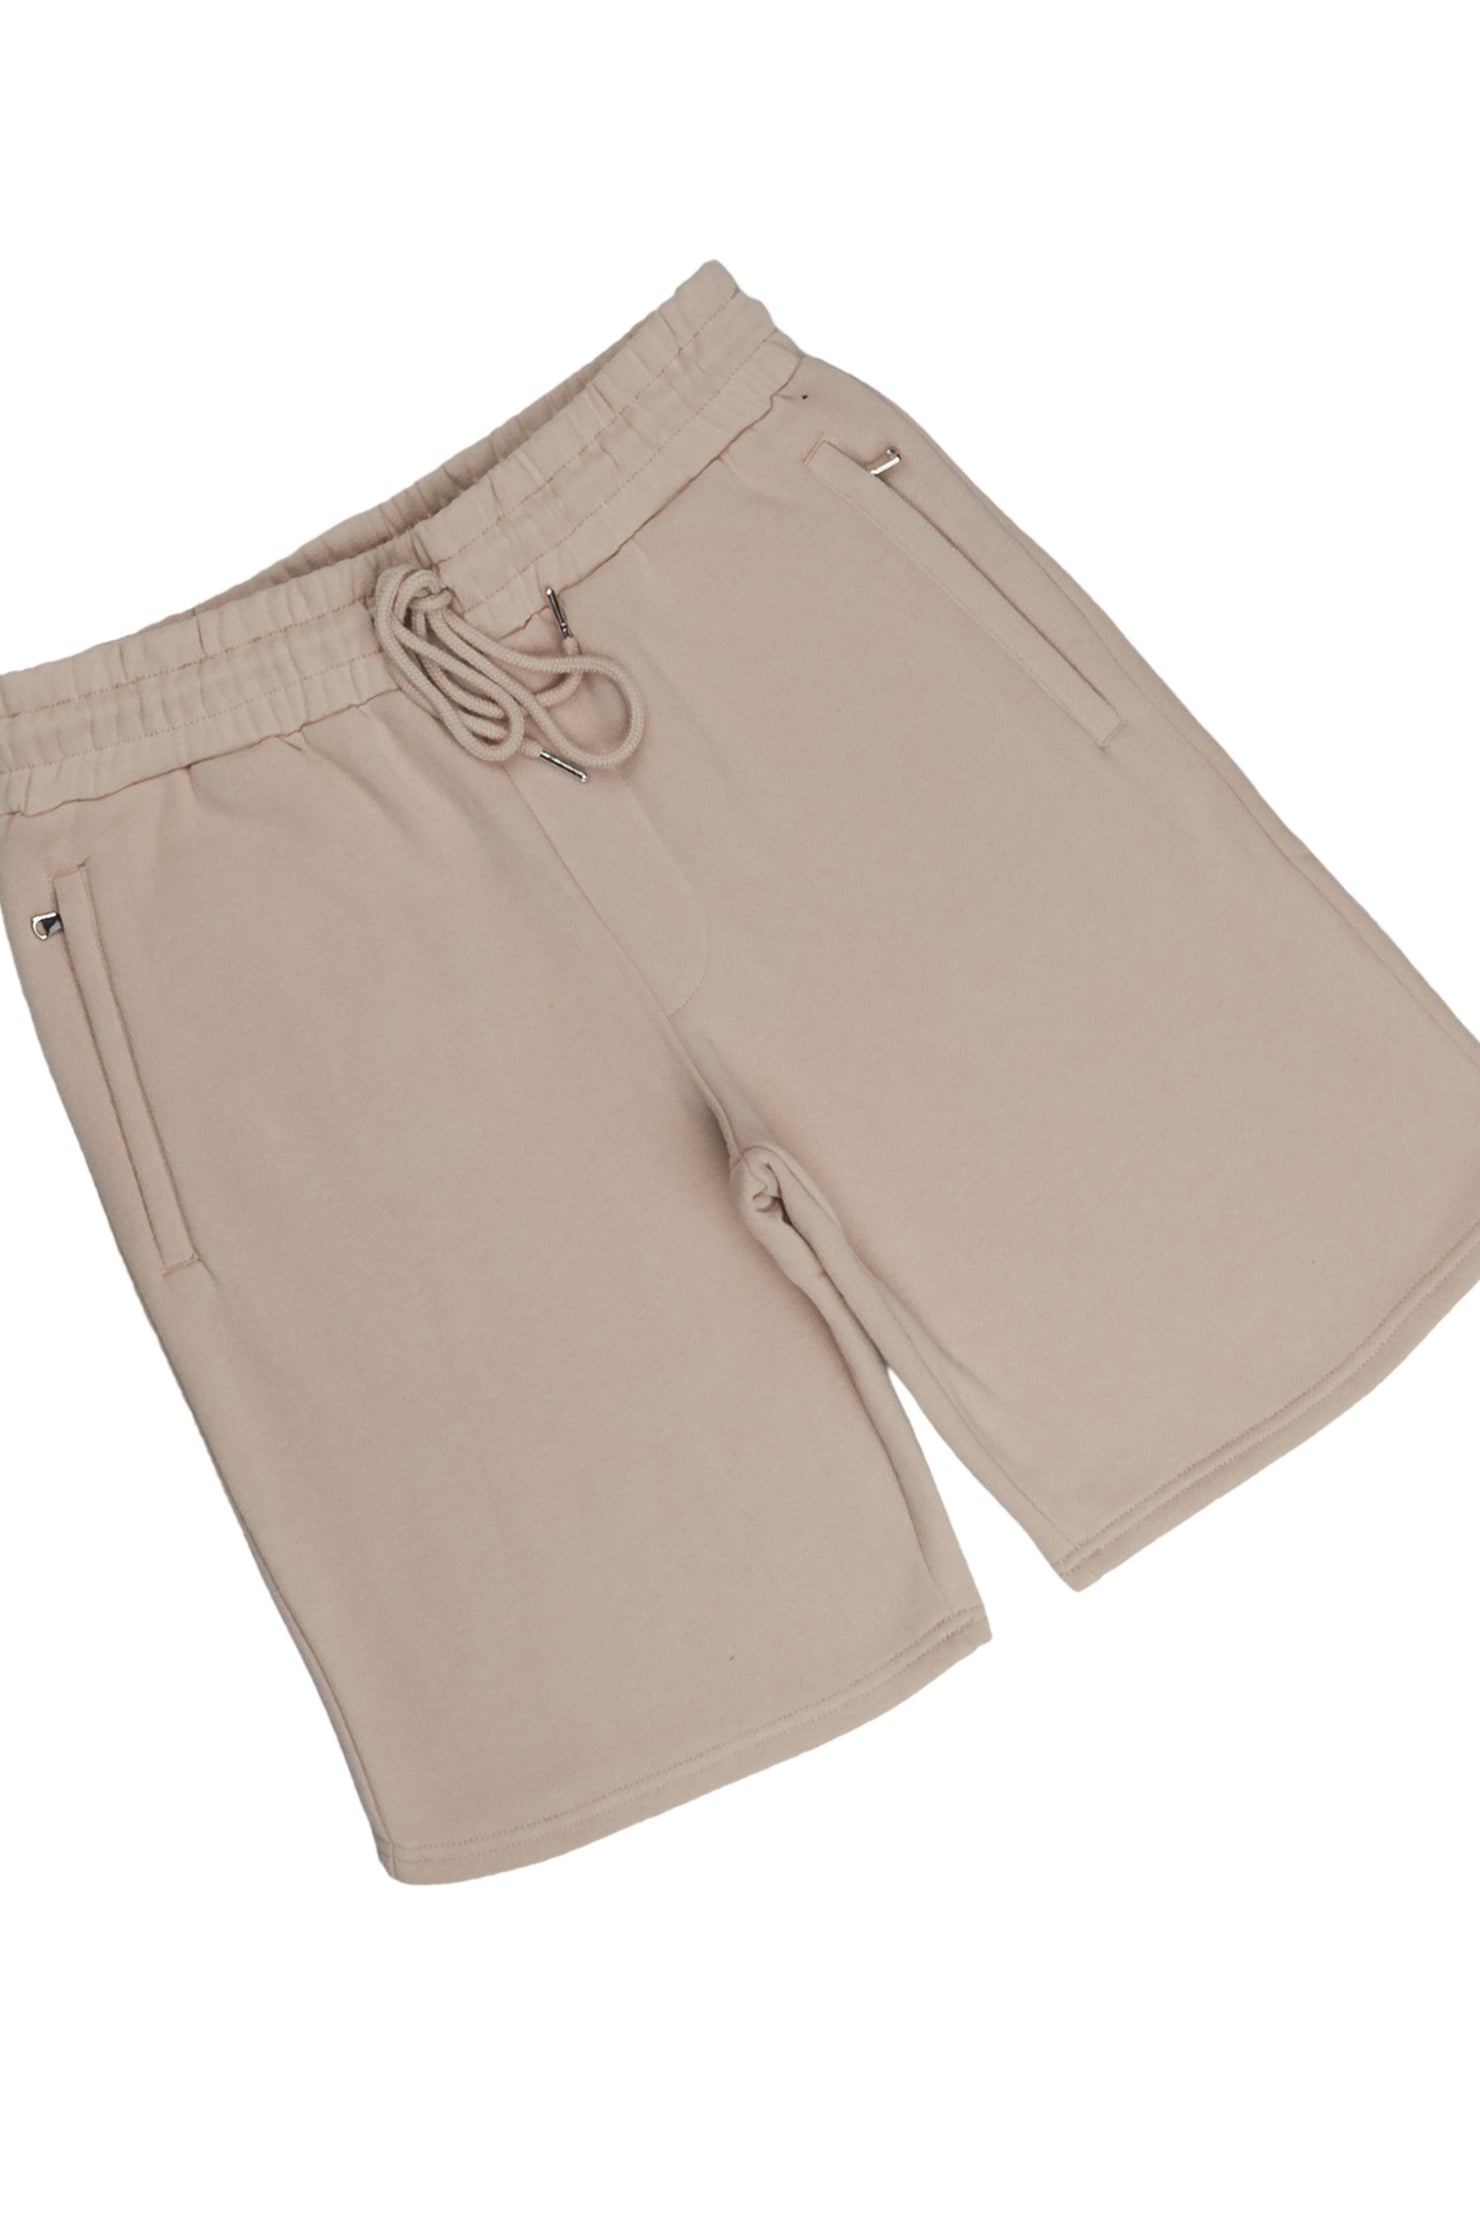 Alessio Taupe T-Shirt/Short Set